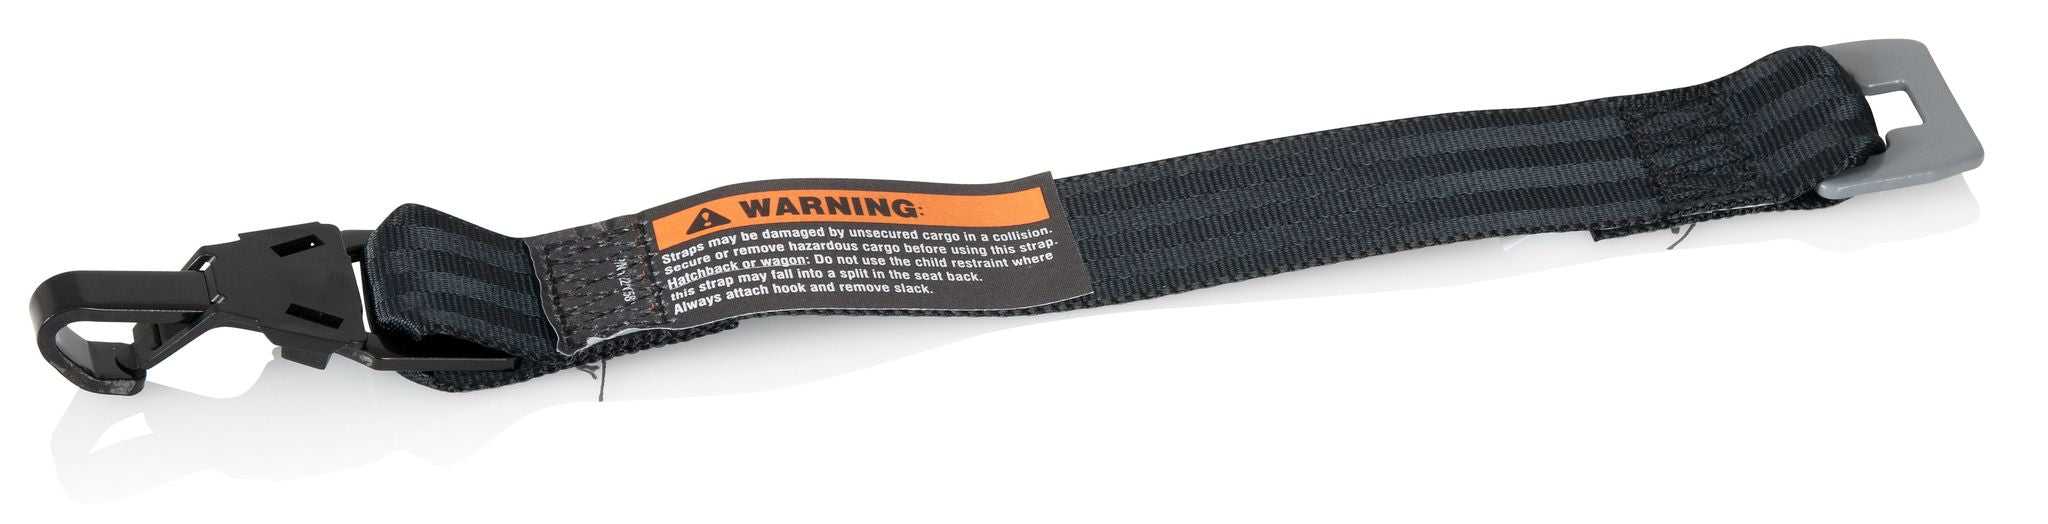 Britax Safe-n-Sound 300mm Extension Straps - Tiny Tots Baby Store 